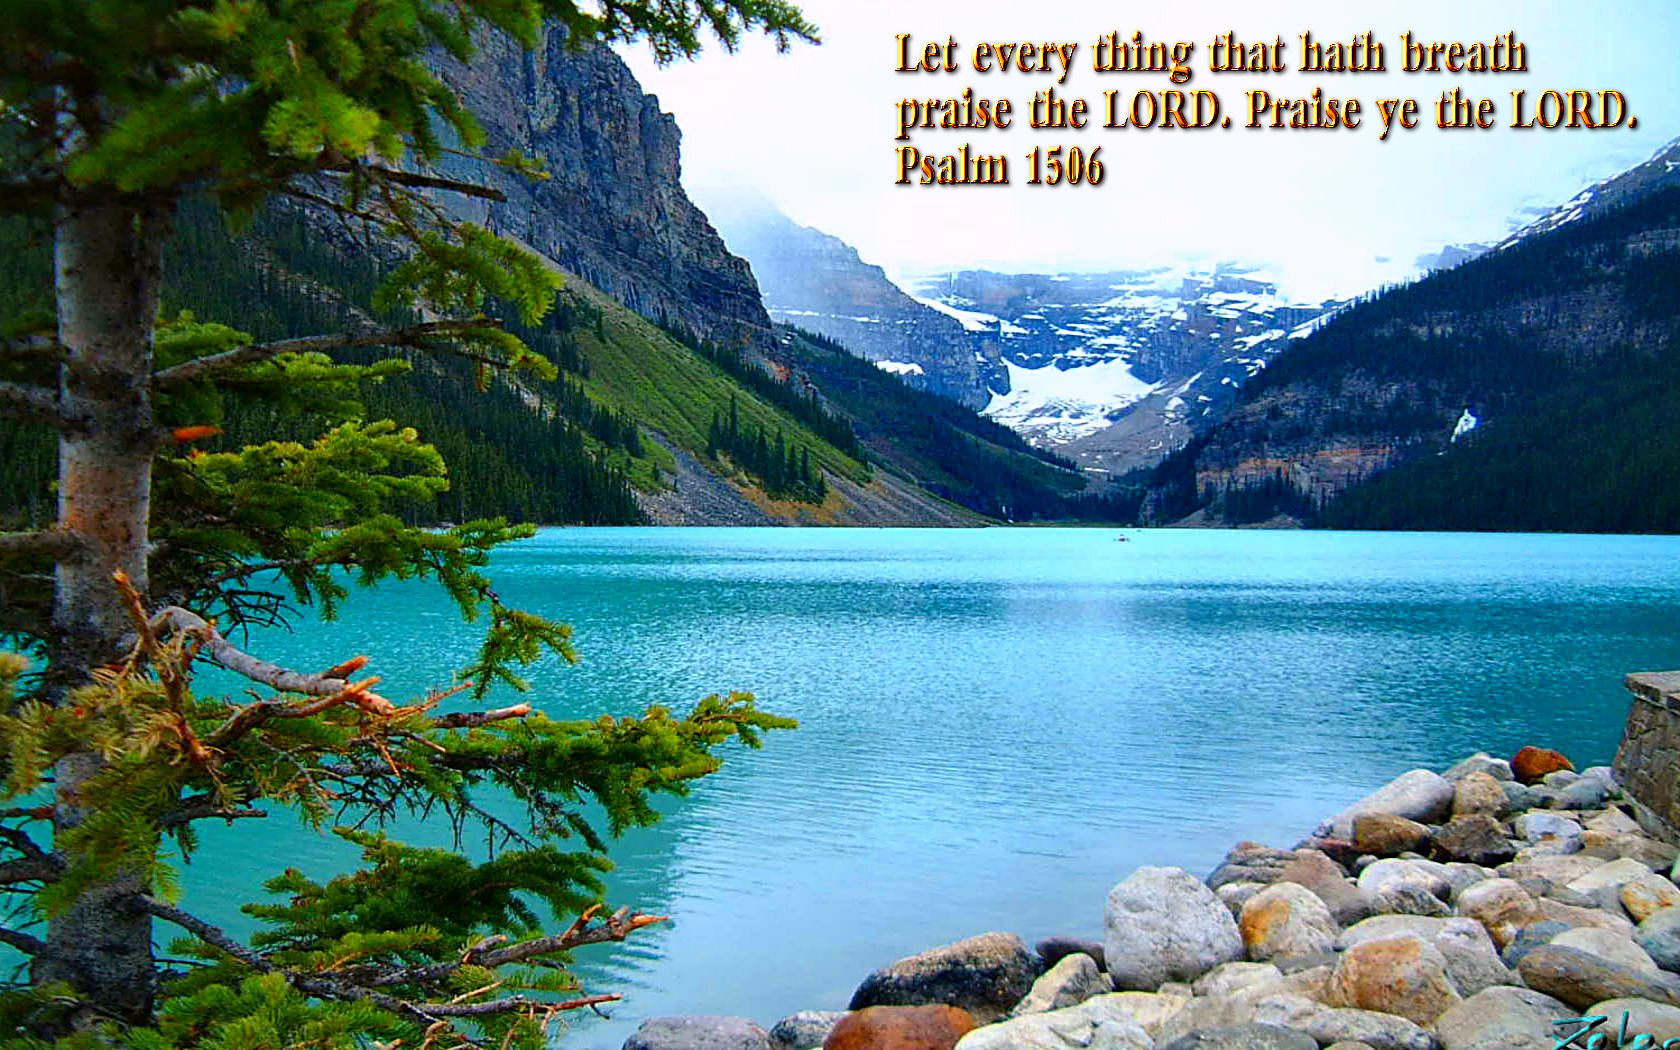  Biblical Quotes Tumblr Images Wallpapers Pics Pictures Facebook Covers 1680x1050